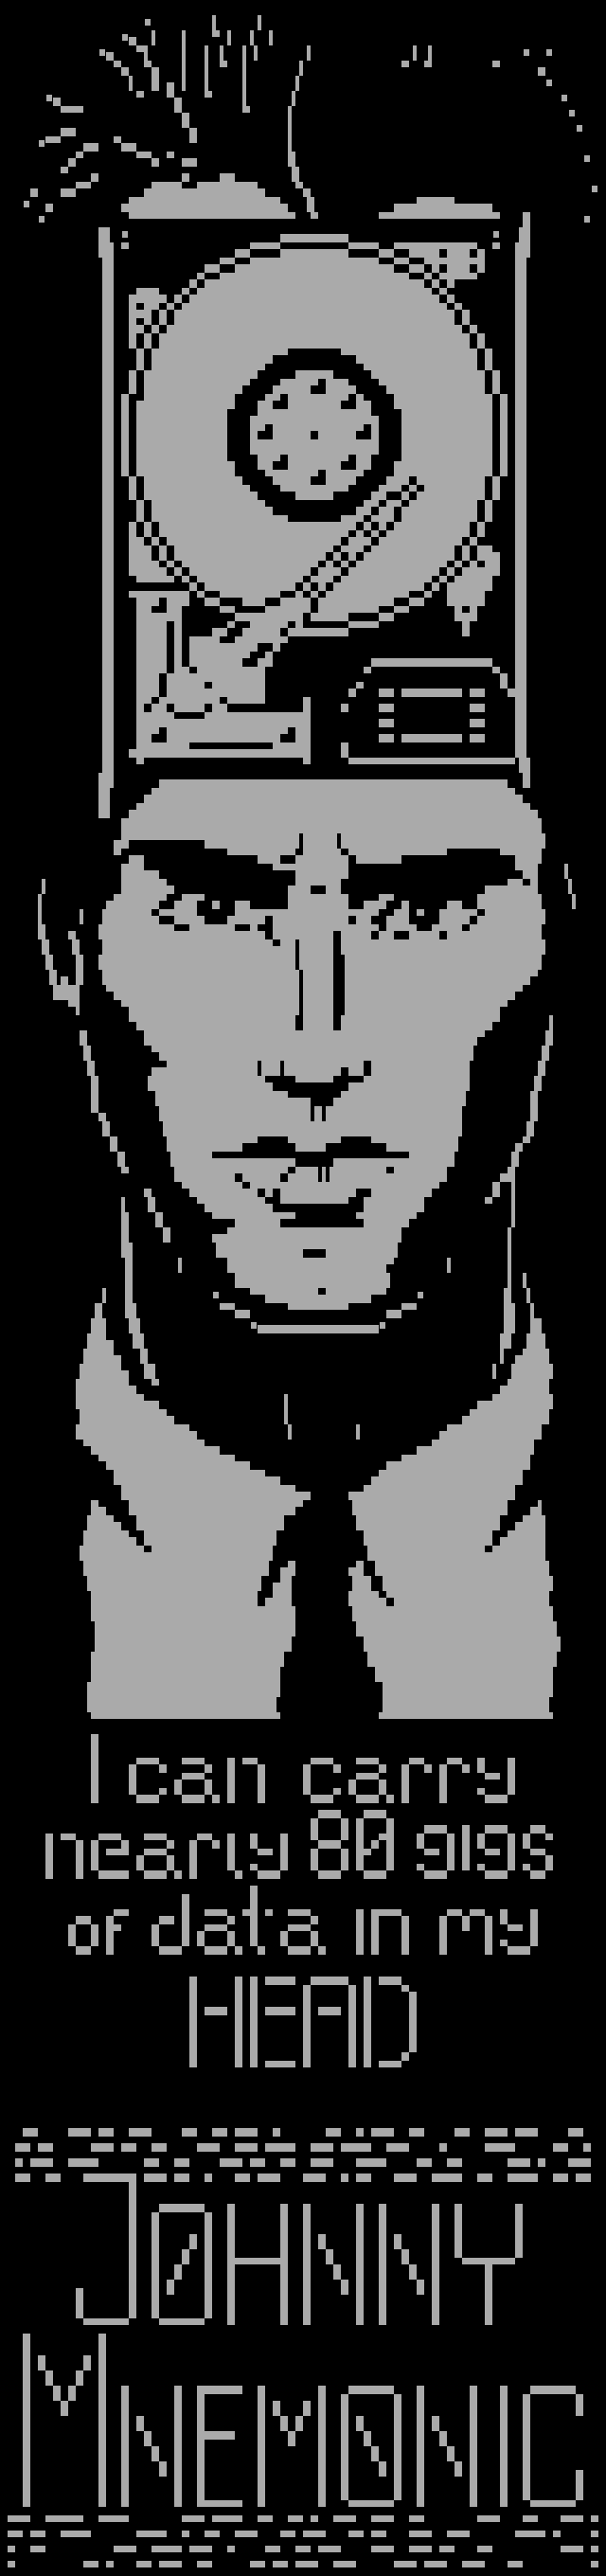 Johnny Mnemonic by andyh